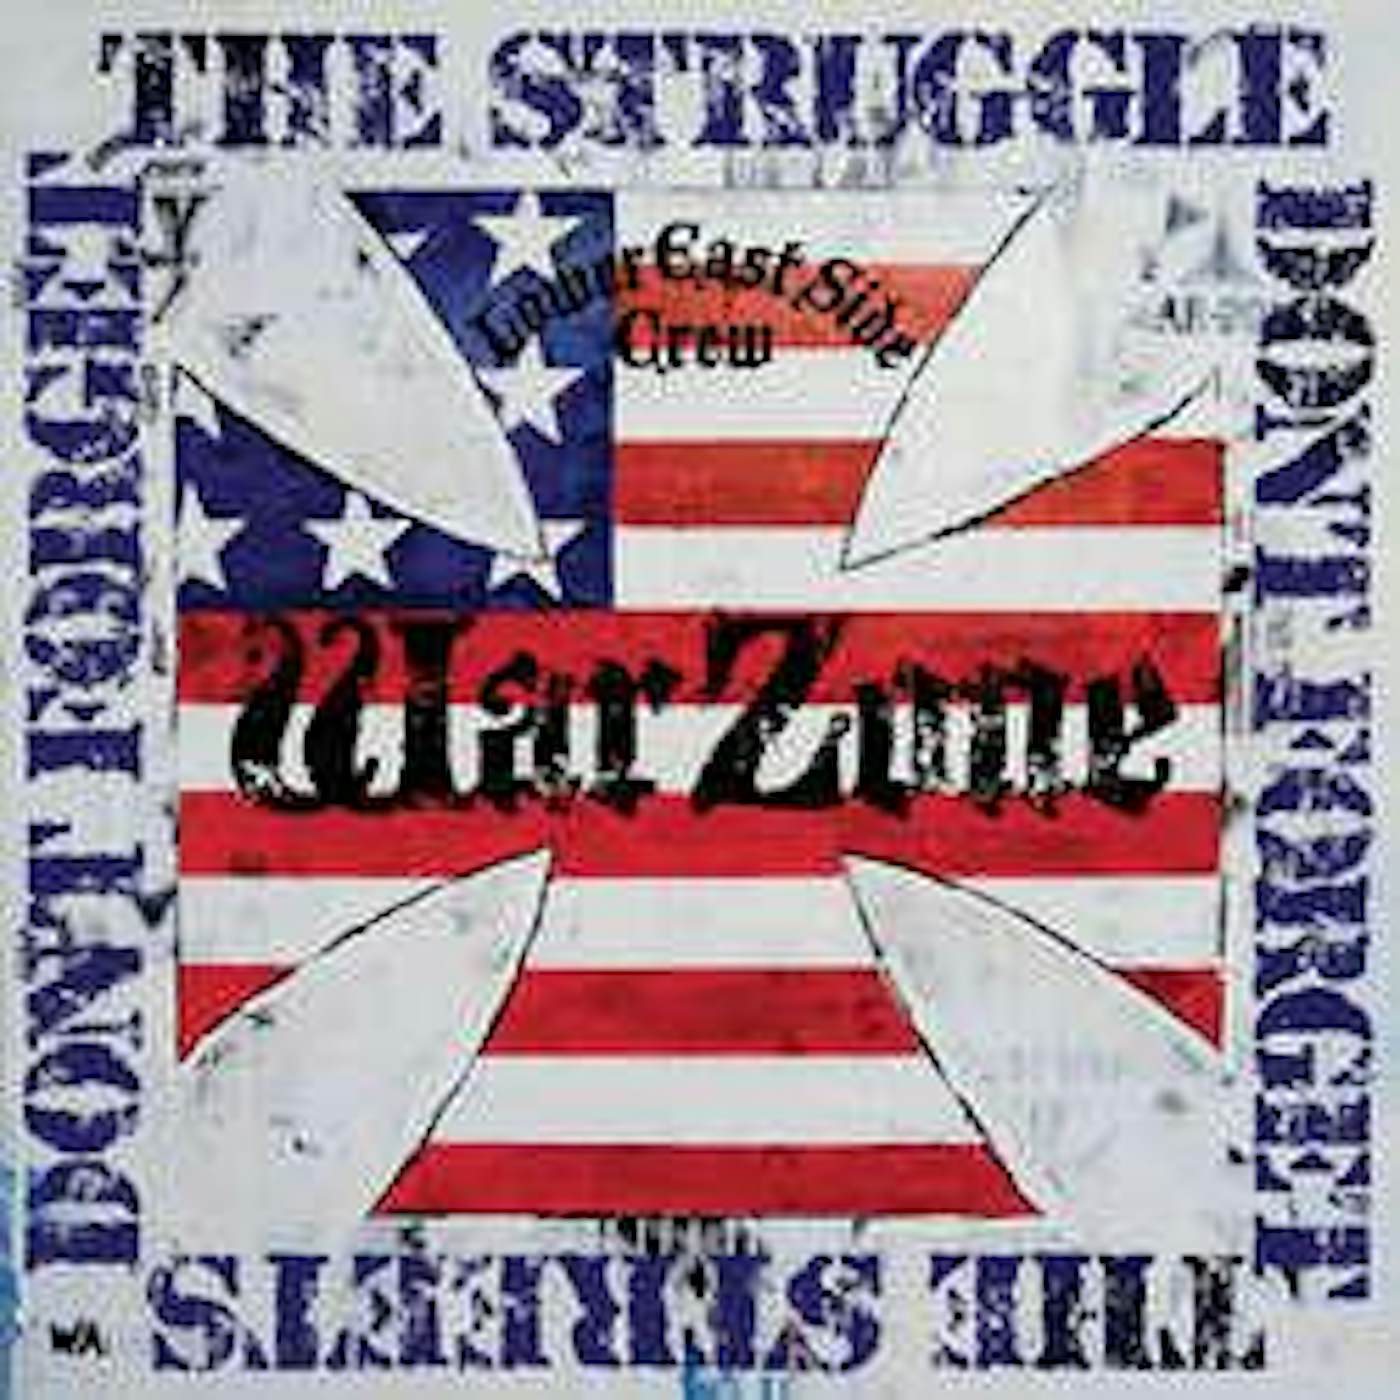 Warzone DON'T FORGET THE STRUGGLE, DON'T FORGET THE STREETS CD